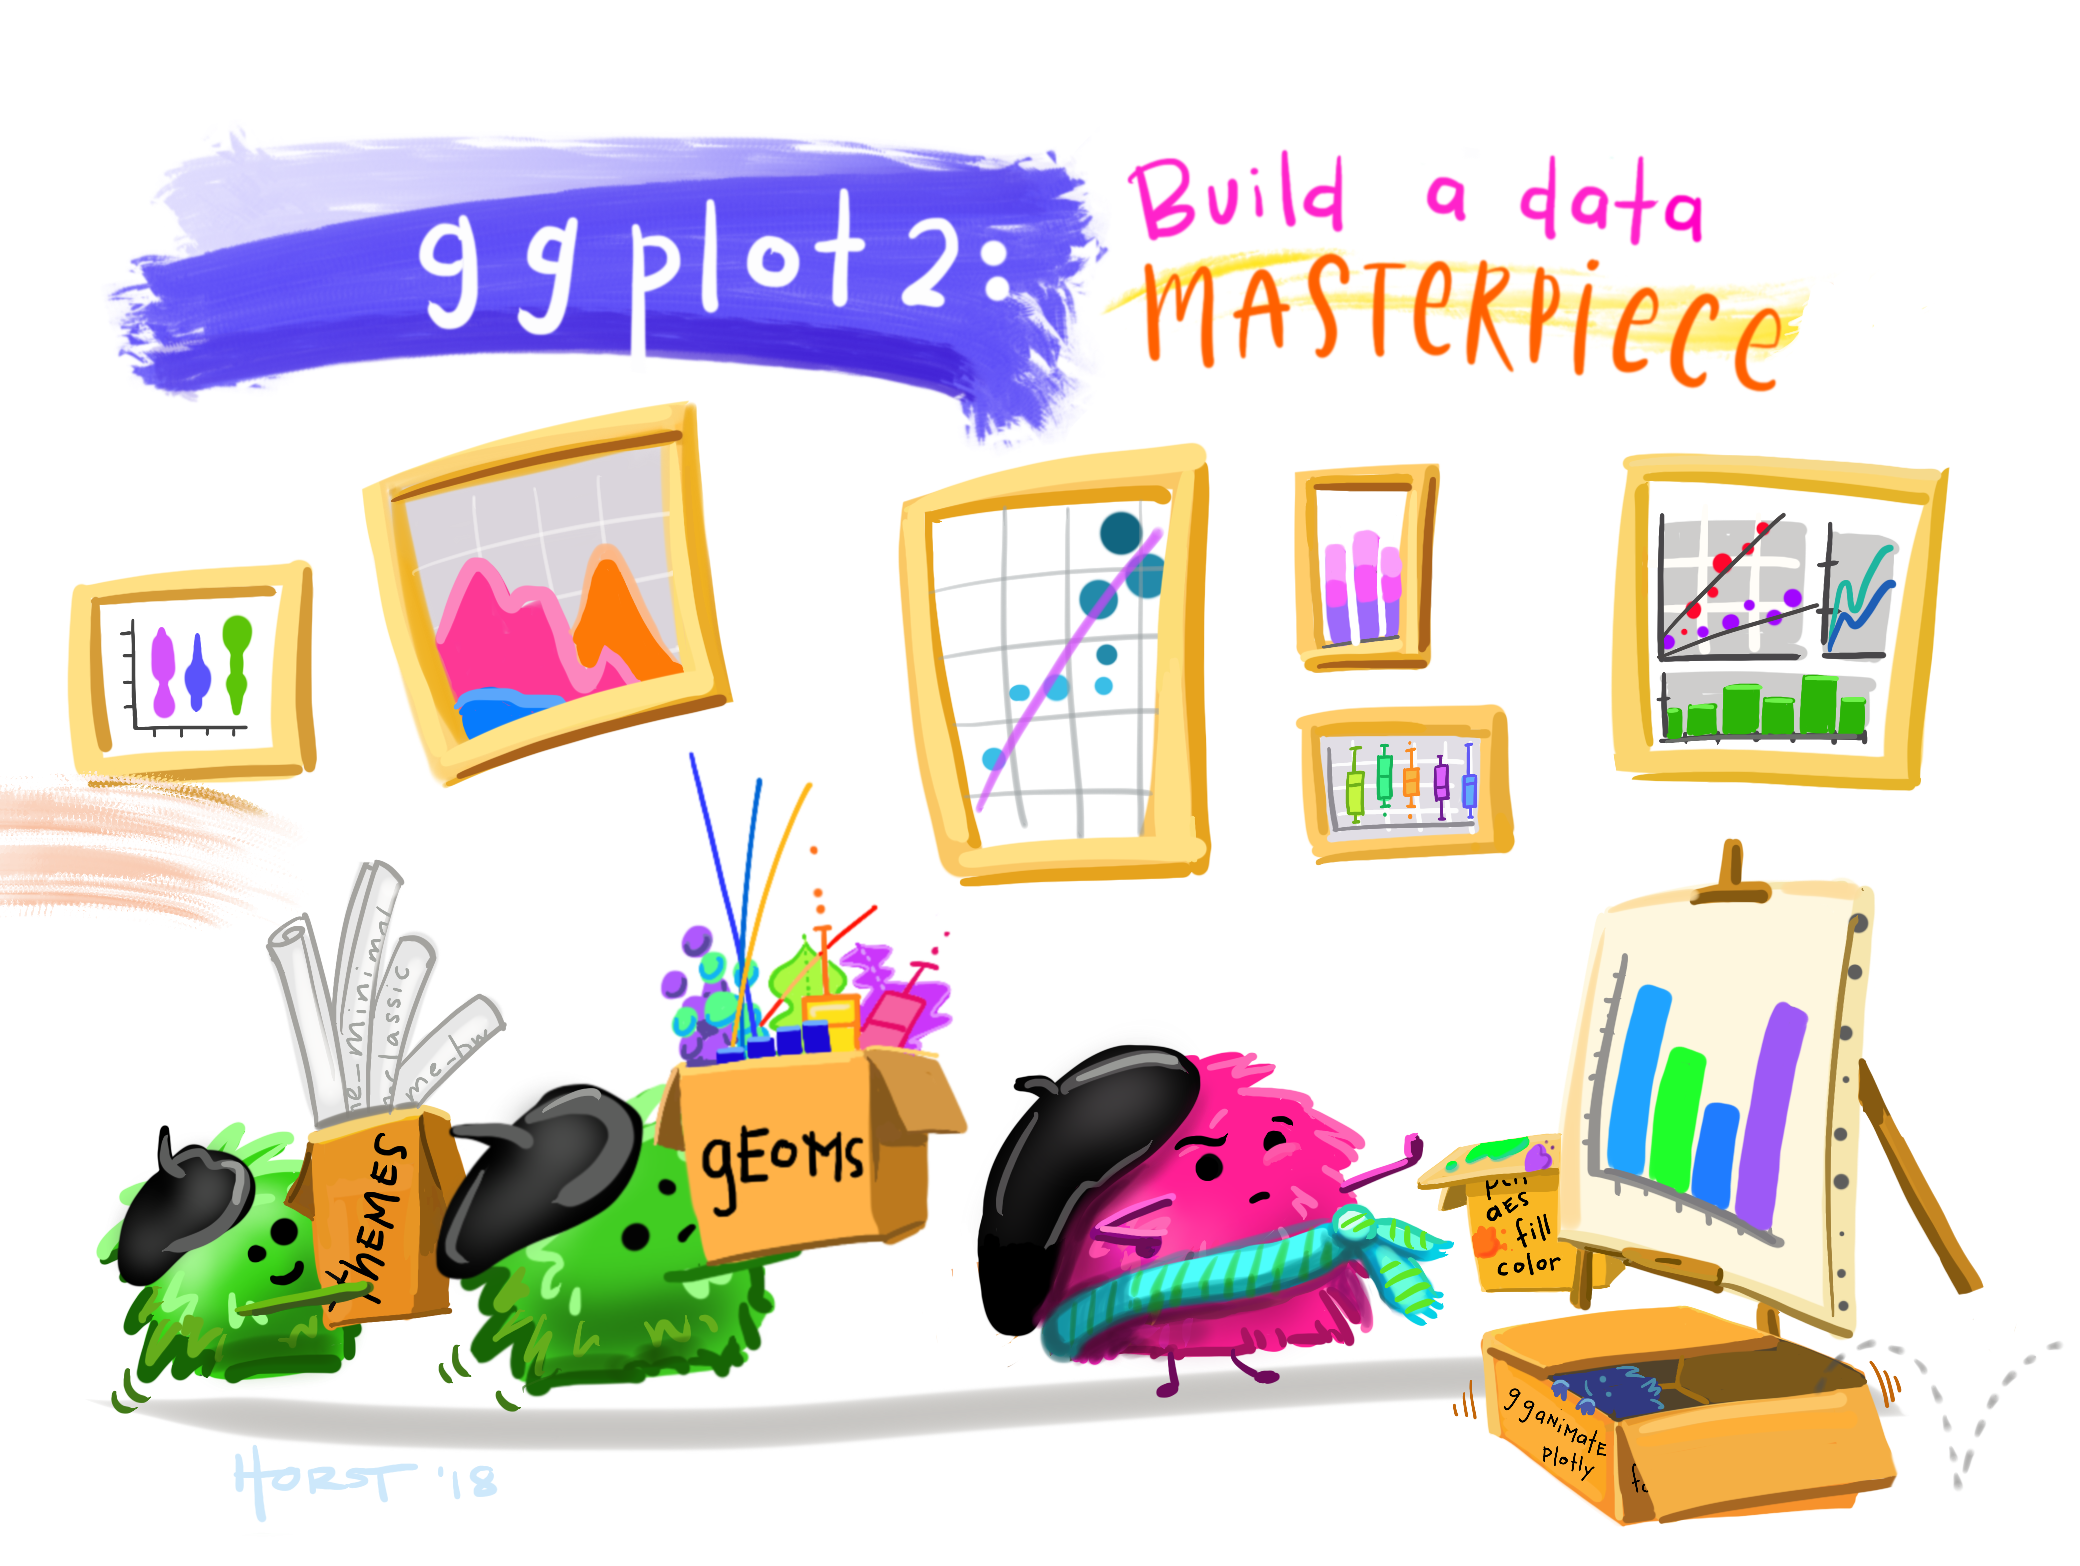 A fuzzy monster in a beret and scarf, critiquing their own column graph on a canvas in front of them while other assistant monsters (also in berets) carry over boxes full of elements that can be used to customize a graph (like themes and geometric shapes). In the background is a wall with framed data visualizations. Stylized text reads “ggplot2: build a data masterpiece.